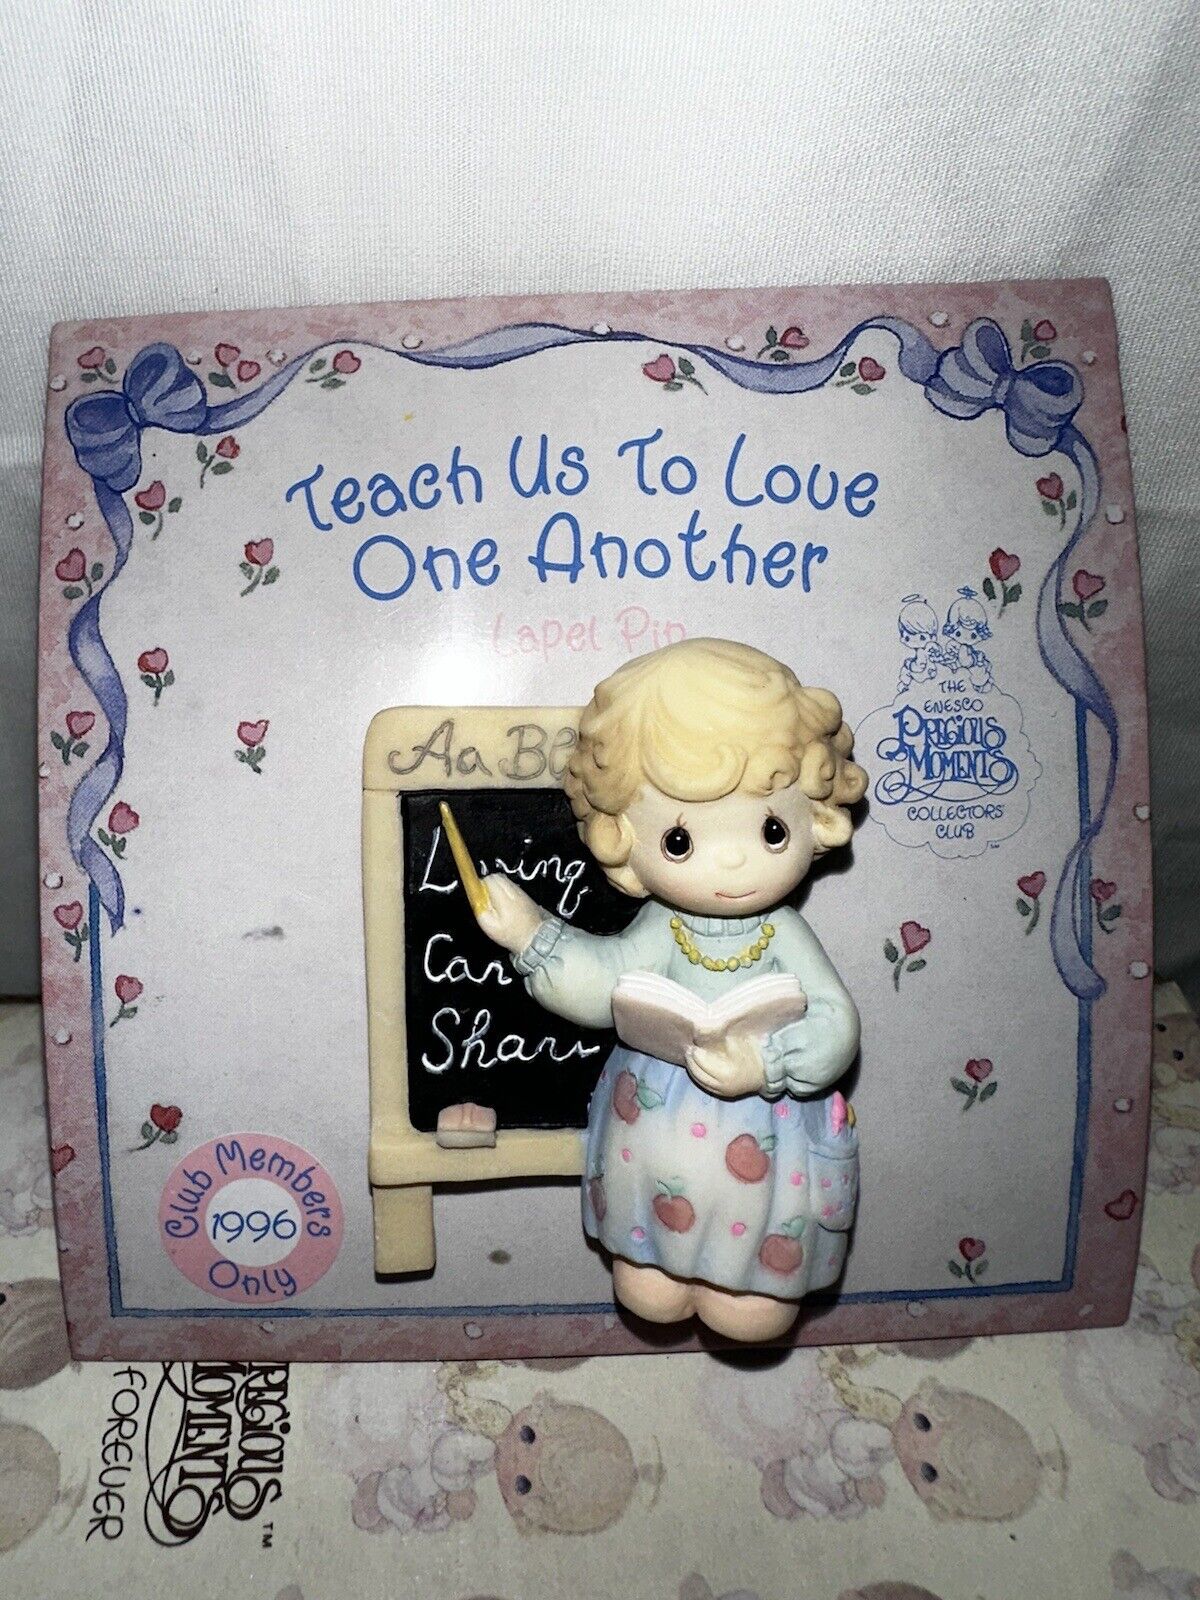 Precious Moments 1996 “Teach Is To Love One Another” Pin